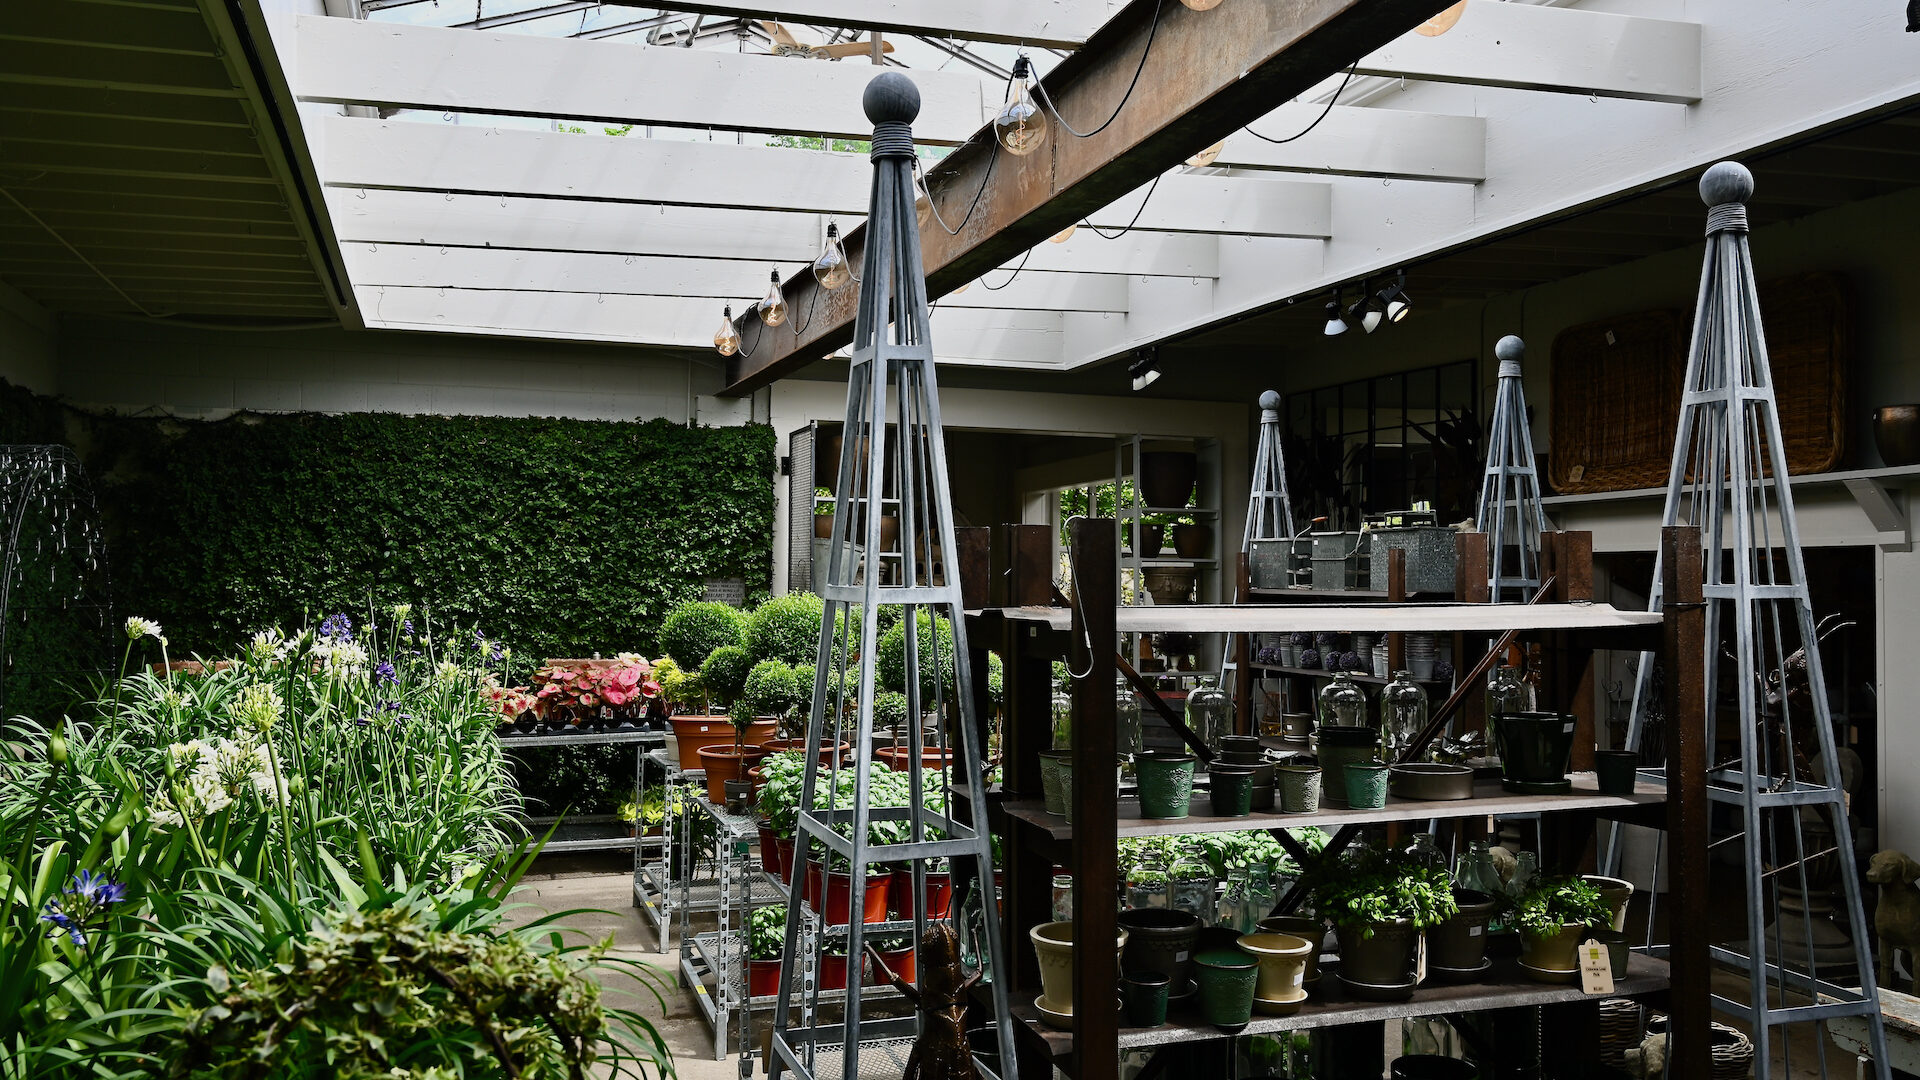 Shop: The Beauty of Form & Function | Detroit Garden Works